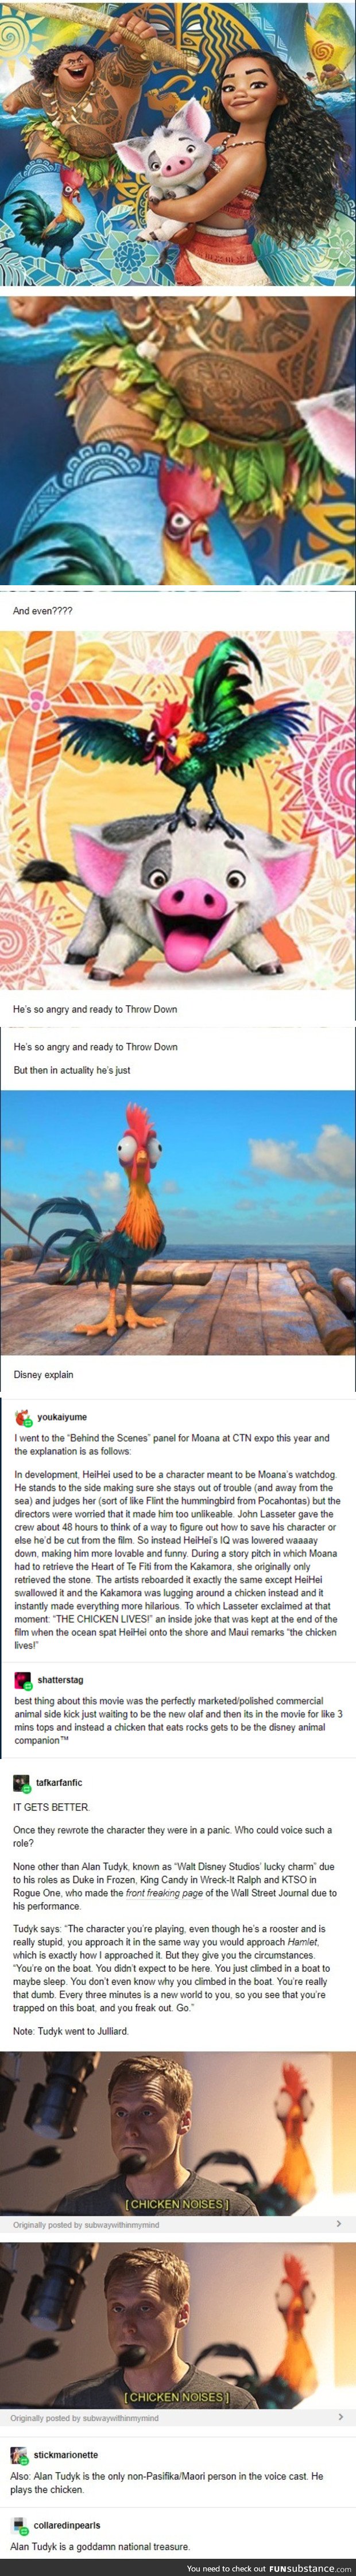 The chicken lives backstory